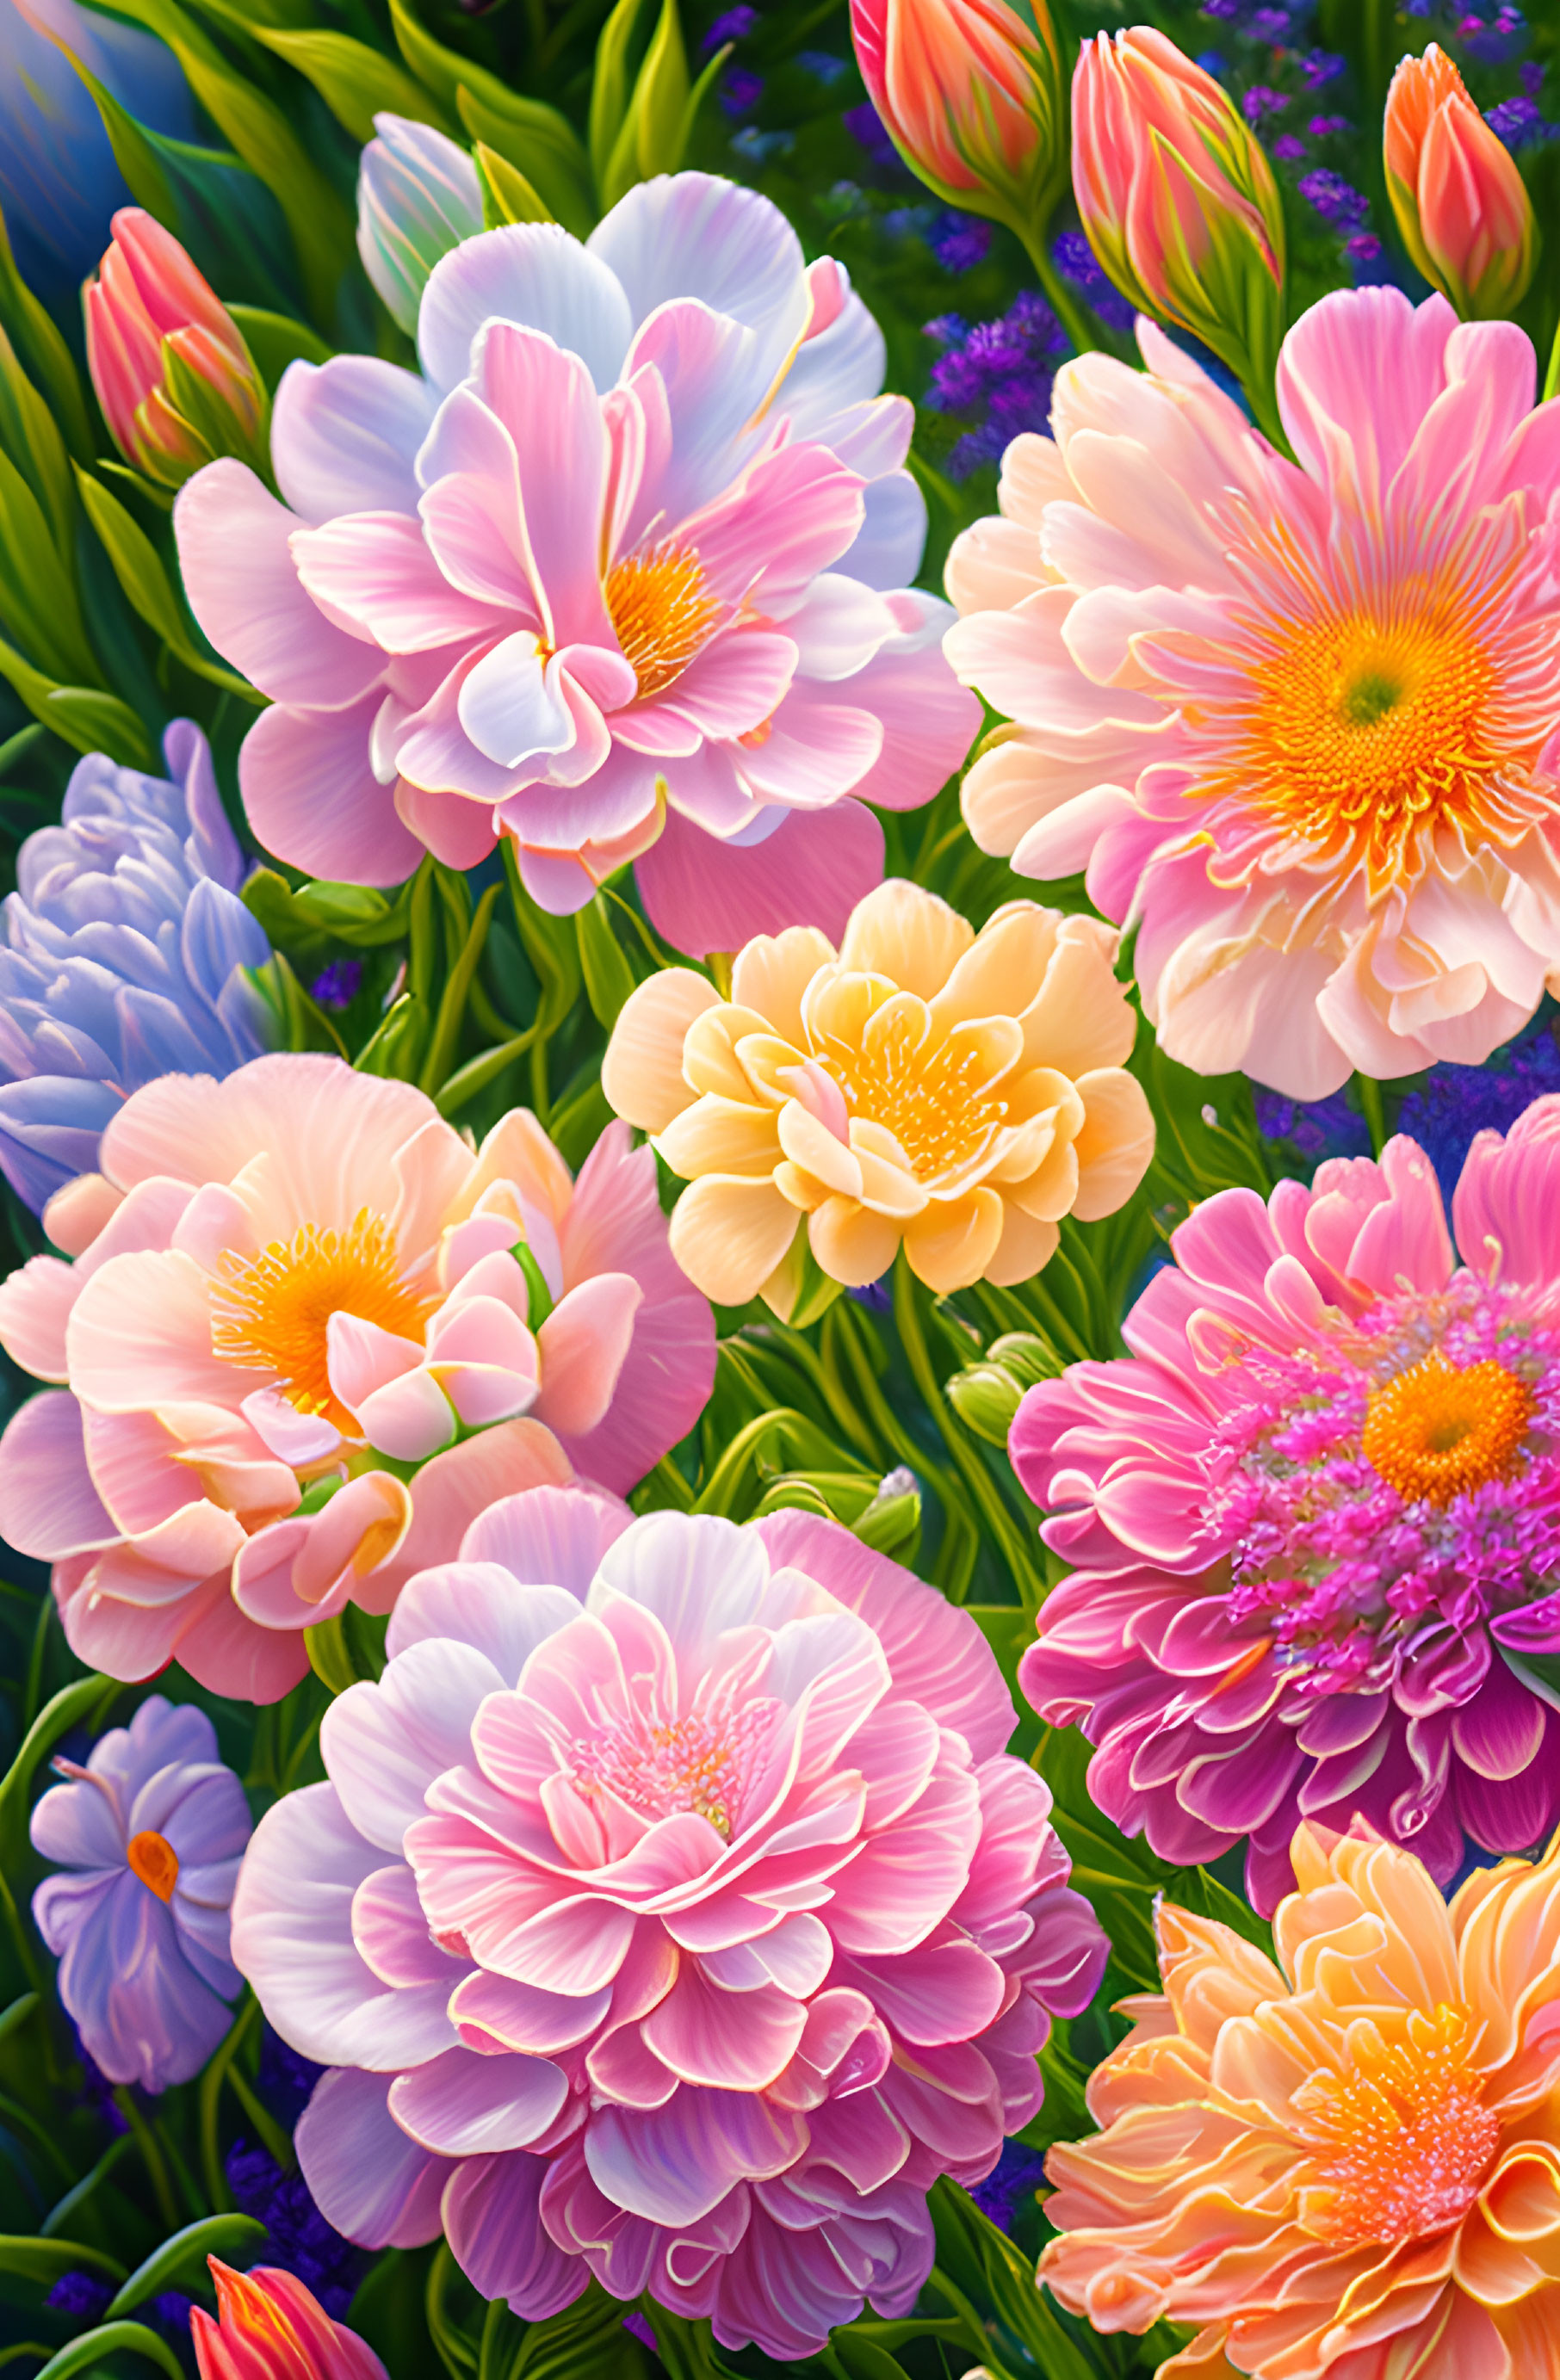 Colorful pink, orange, and purple flowers with intricate petal details in a lush garden